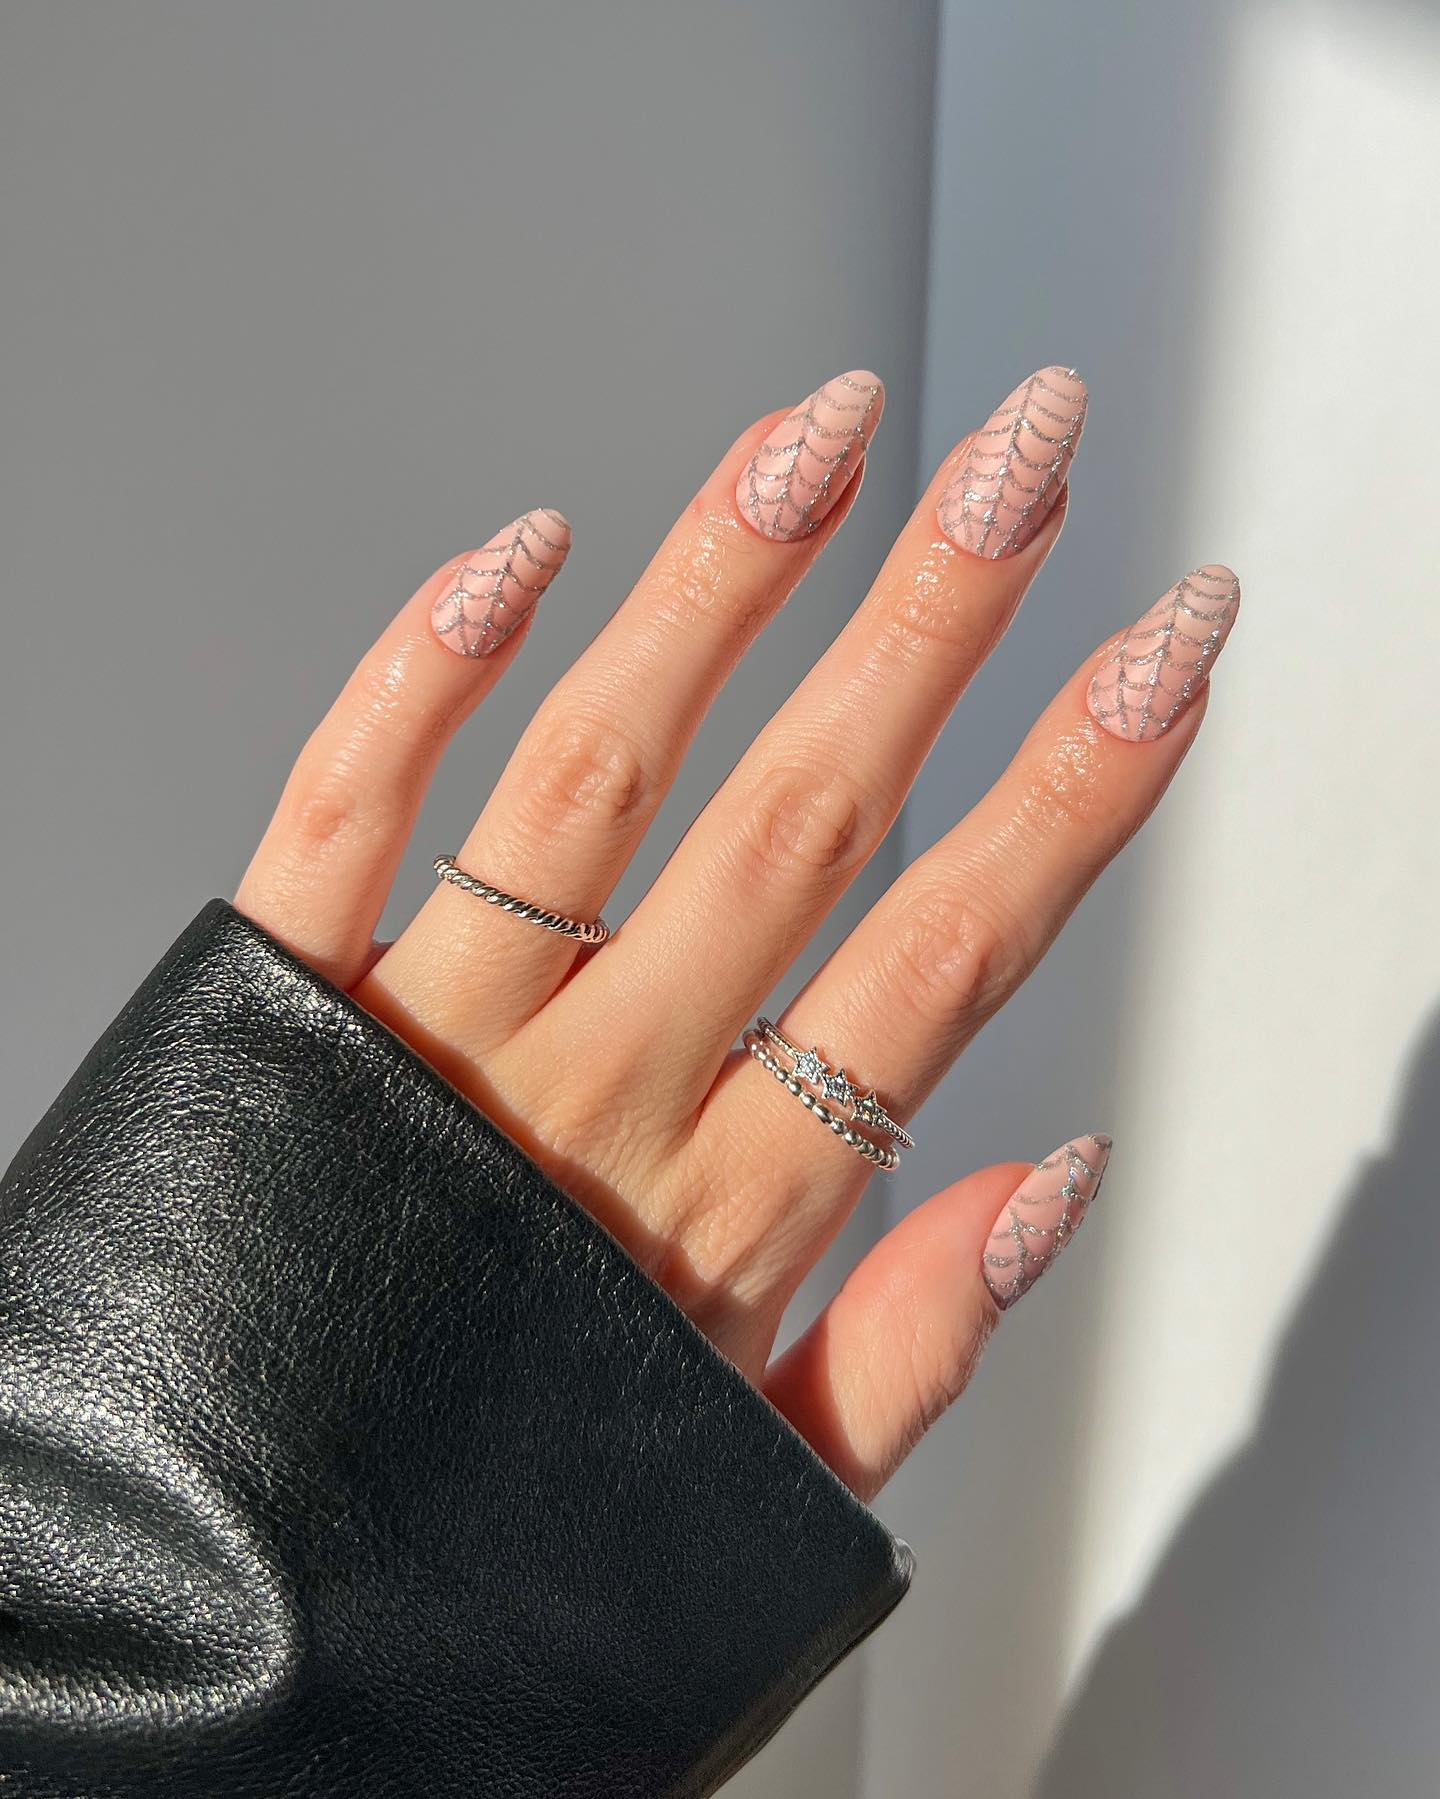 Spider web with glitter tips nail art for halloween - Indian Beauty Forever